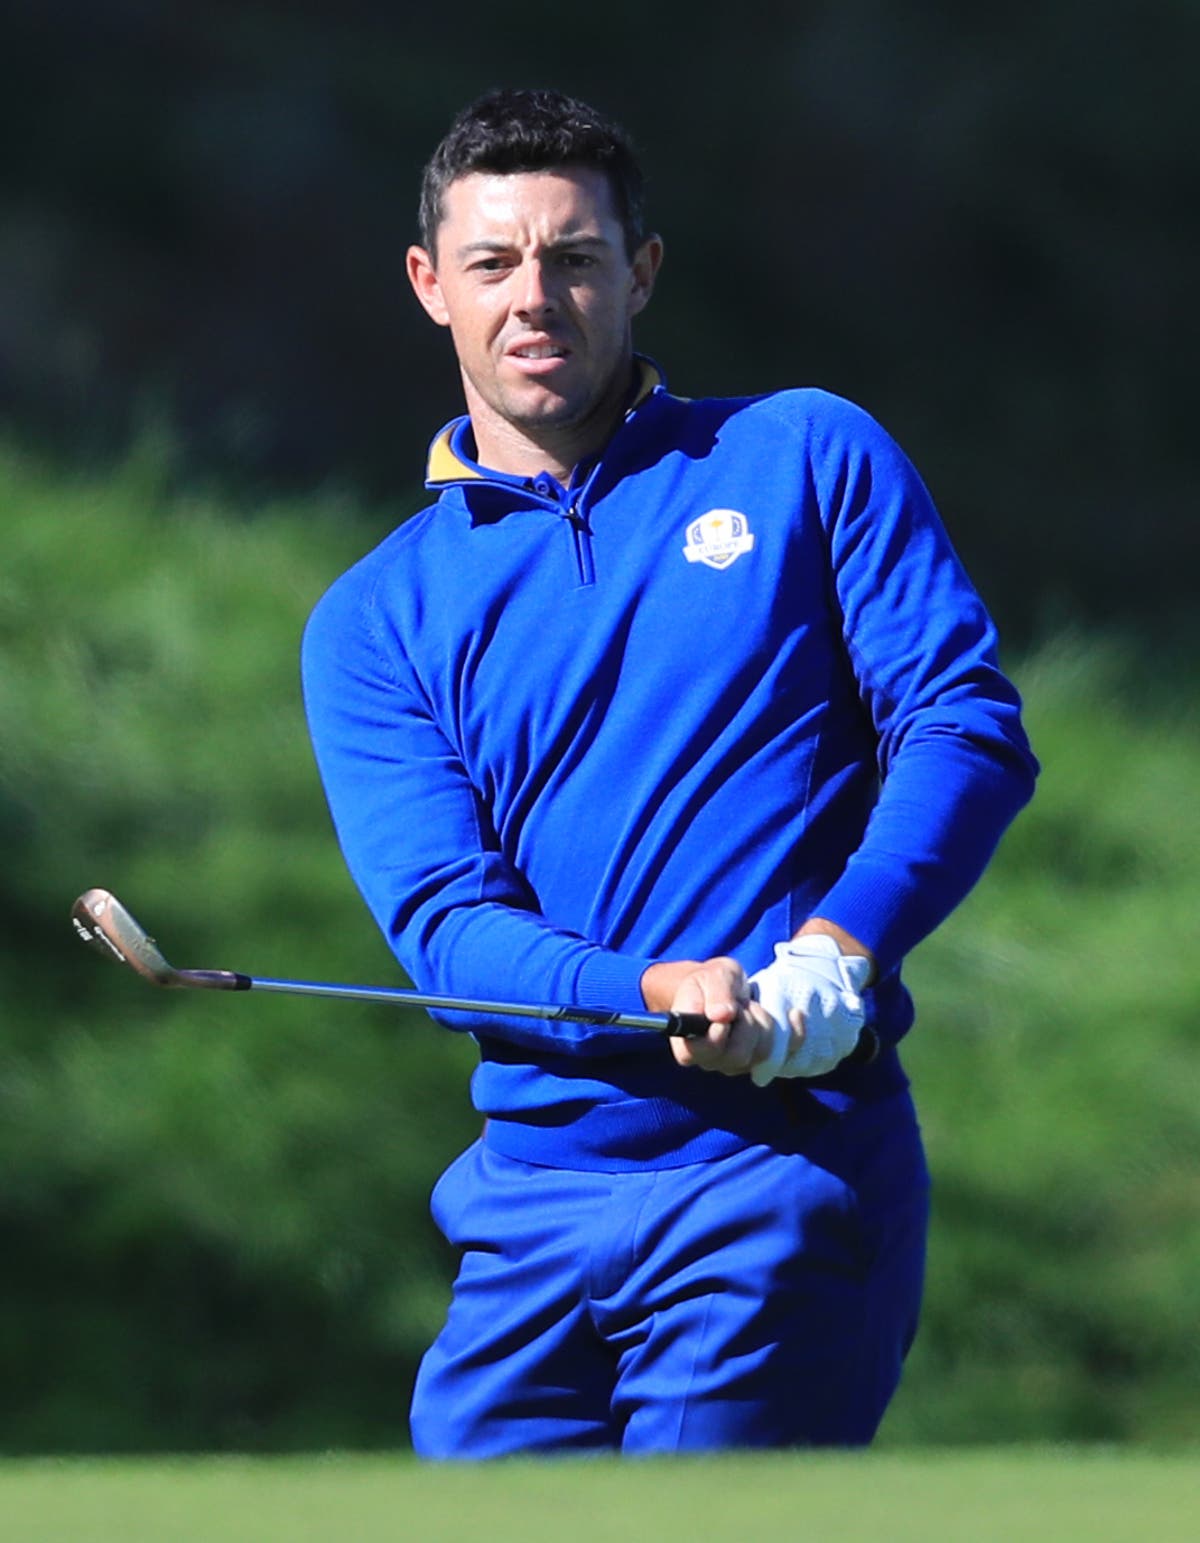 Any rest for Rory and will practice make US perfect? – Ryder Cup talking points